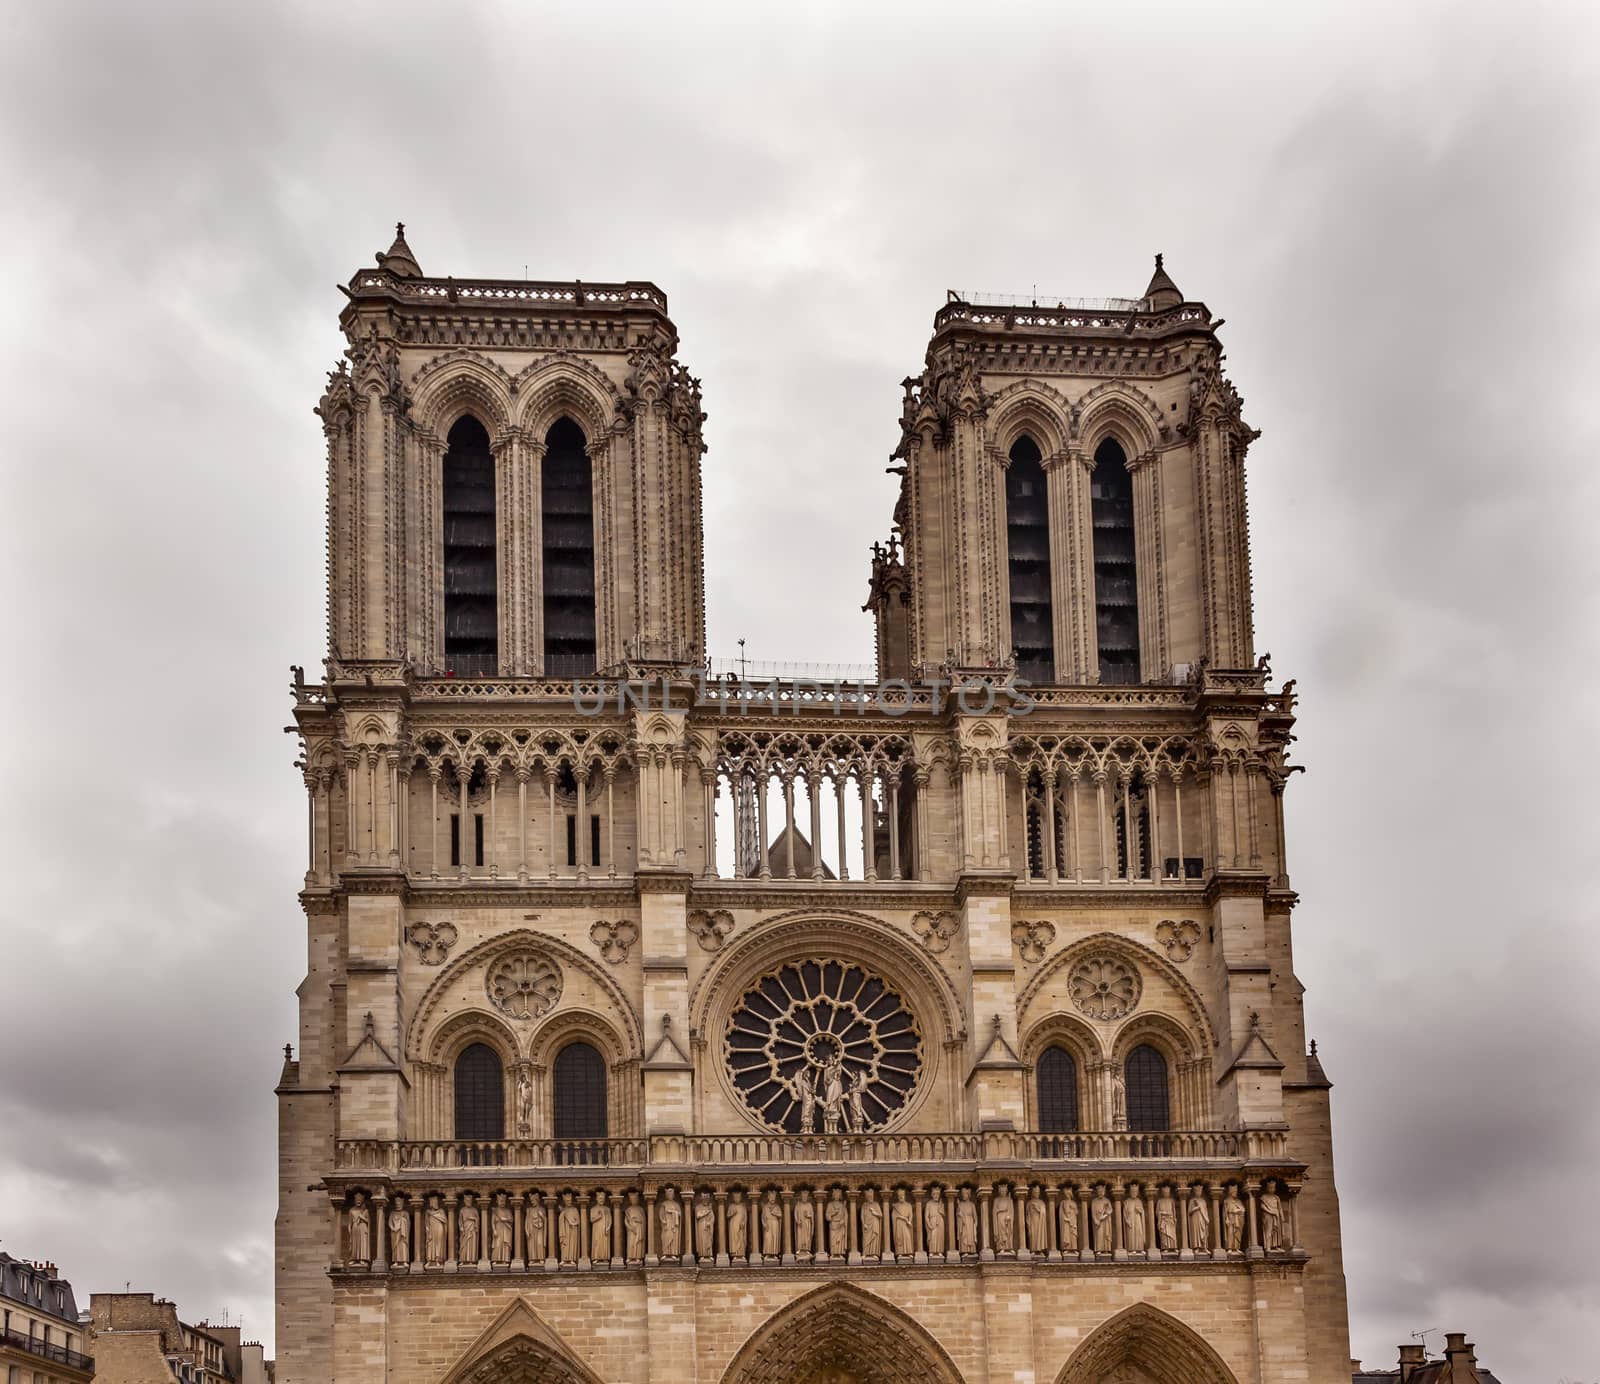 Facade Towers Overcast Skies Notre Dame Cathedral Paris France.  Notre Dame was built between 1163 and 1250AD.  